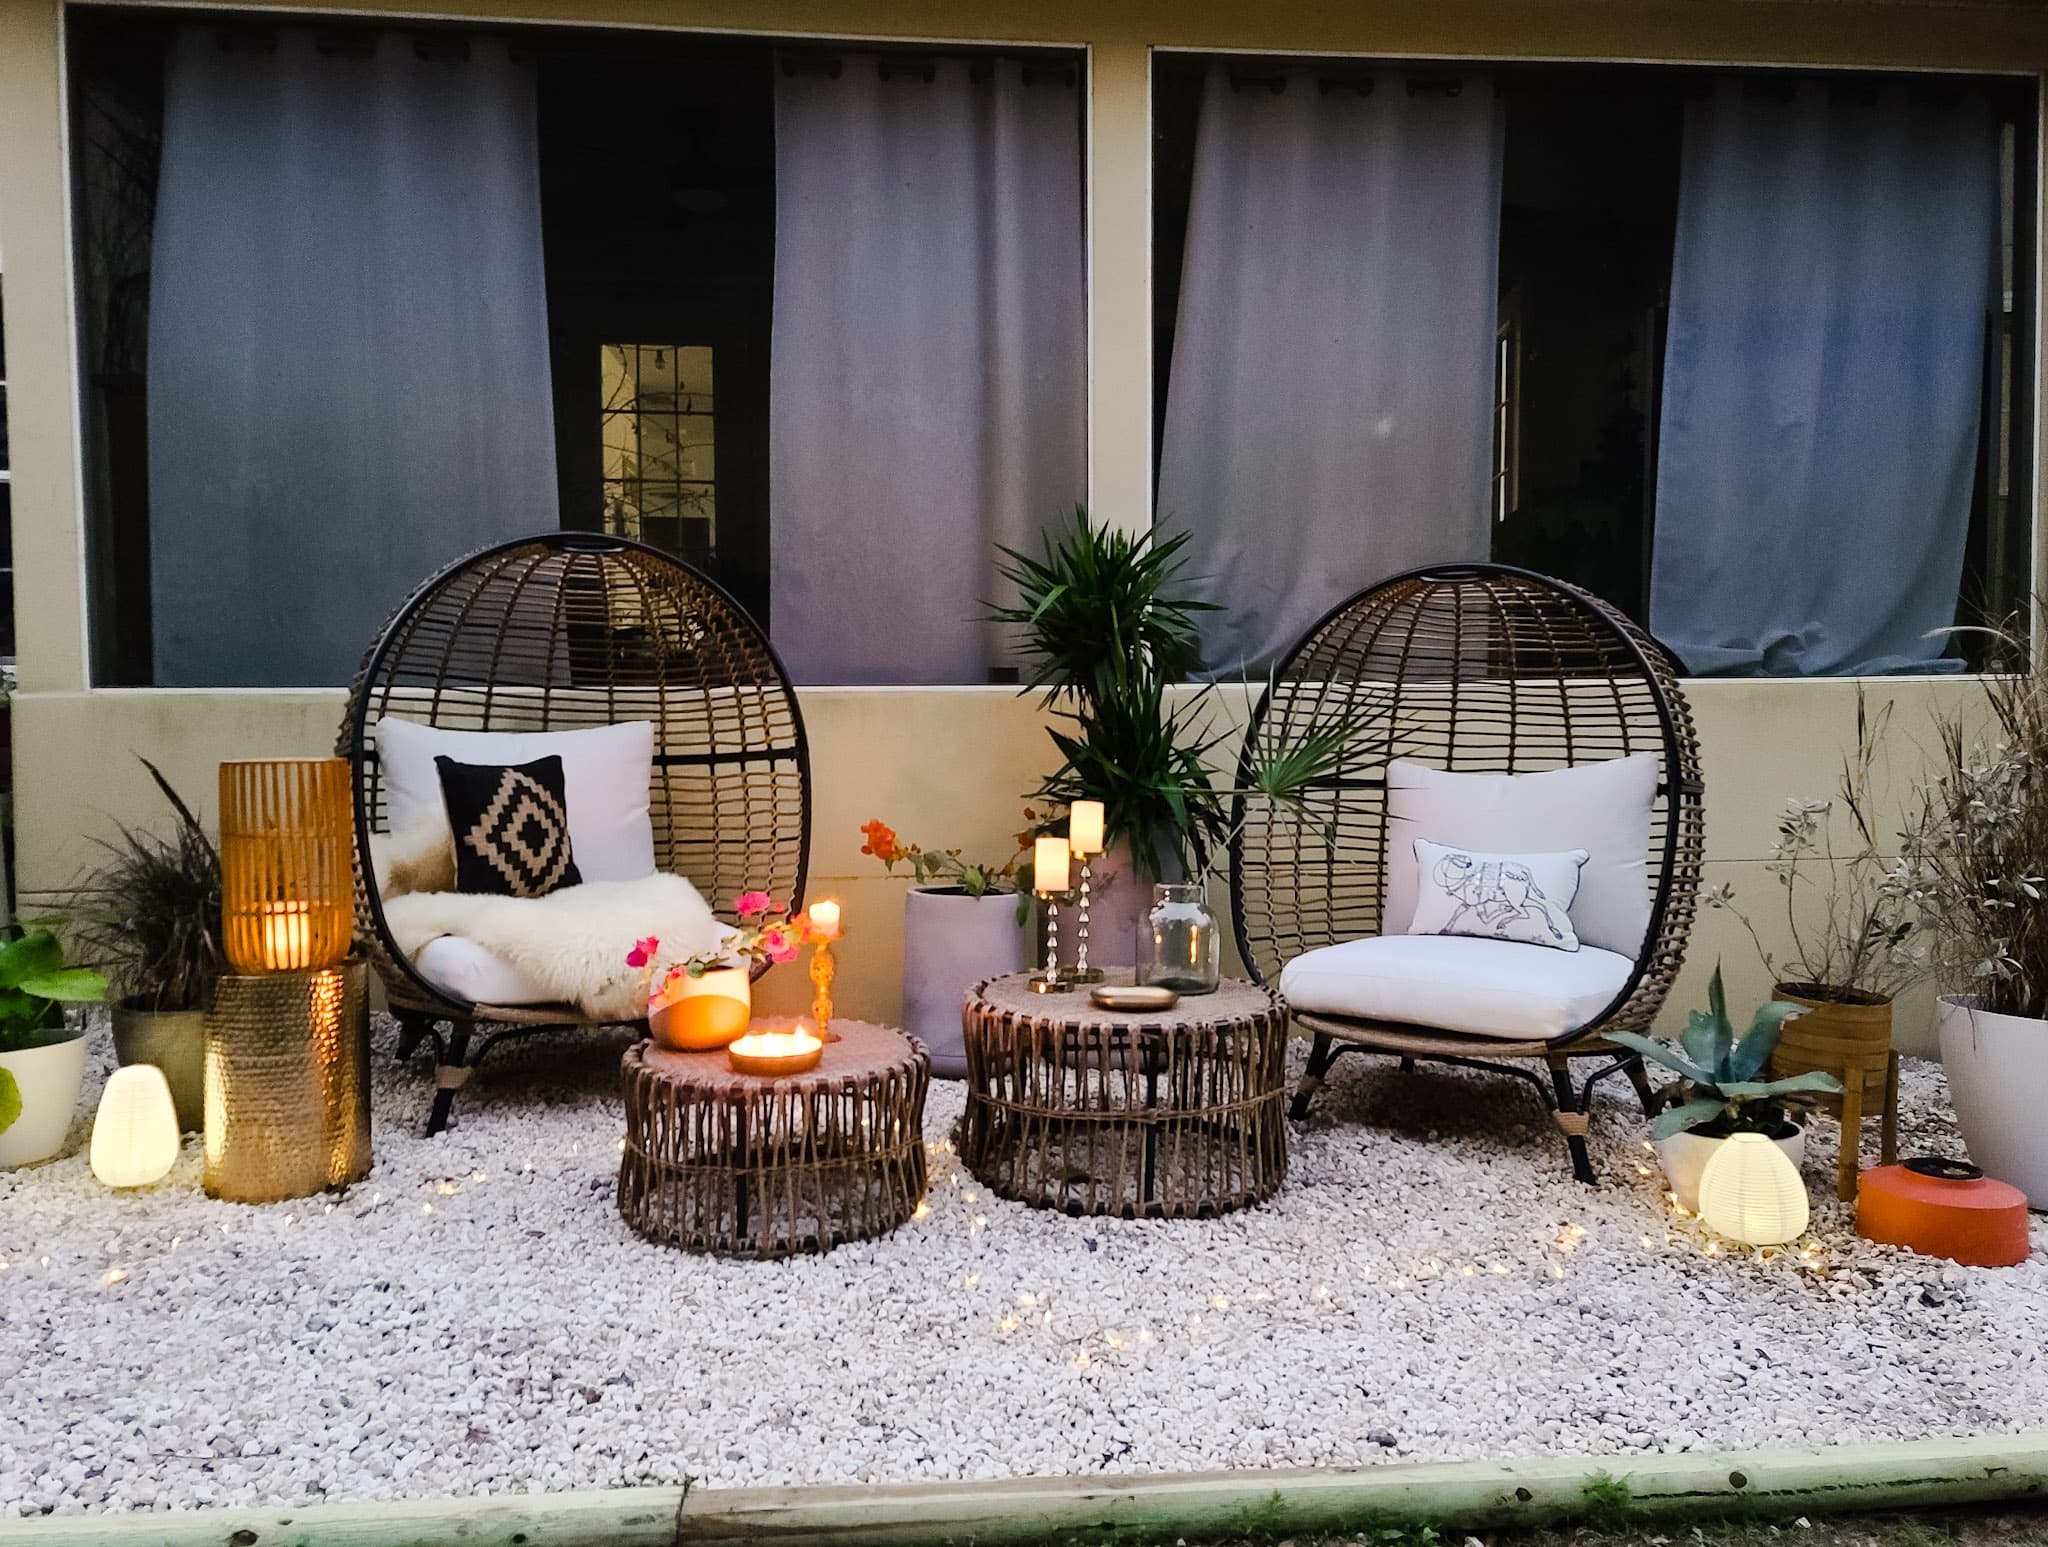 Backyard oasis patio egg chairs with wicker coffee tables gold accents flowers trees and boho chic decor